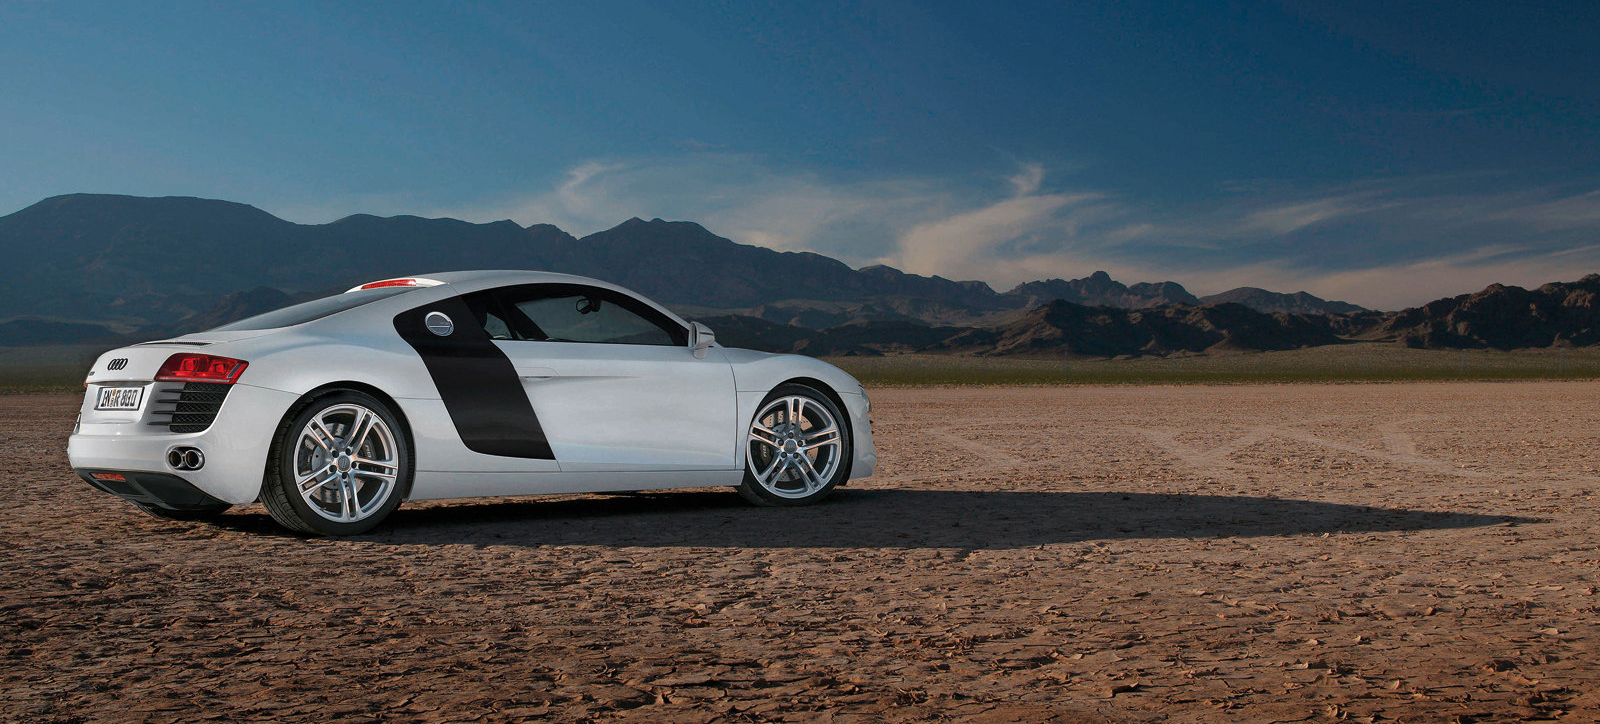 Remember How Weird The Audi R8 Looked When It Came Out?